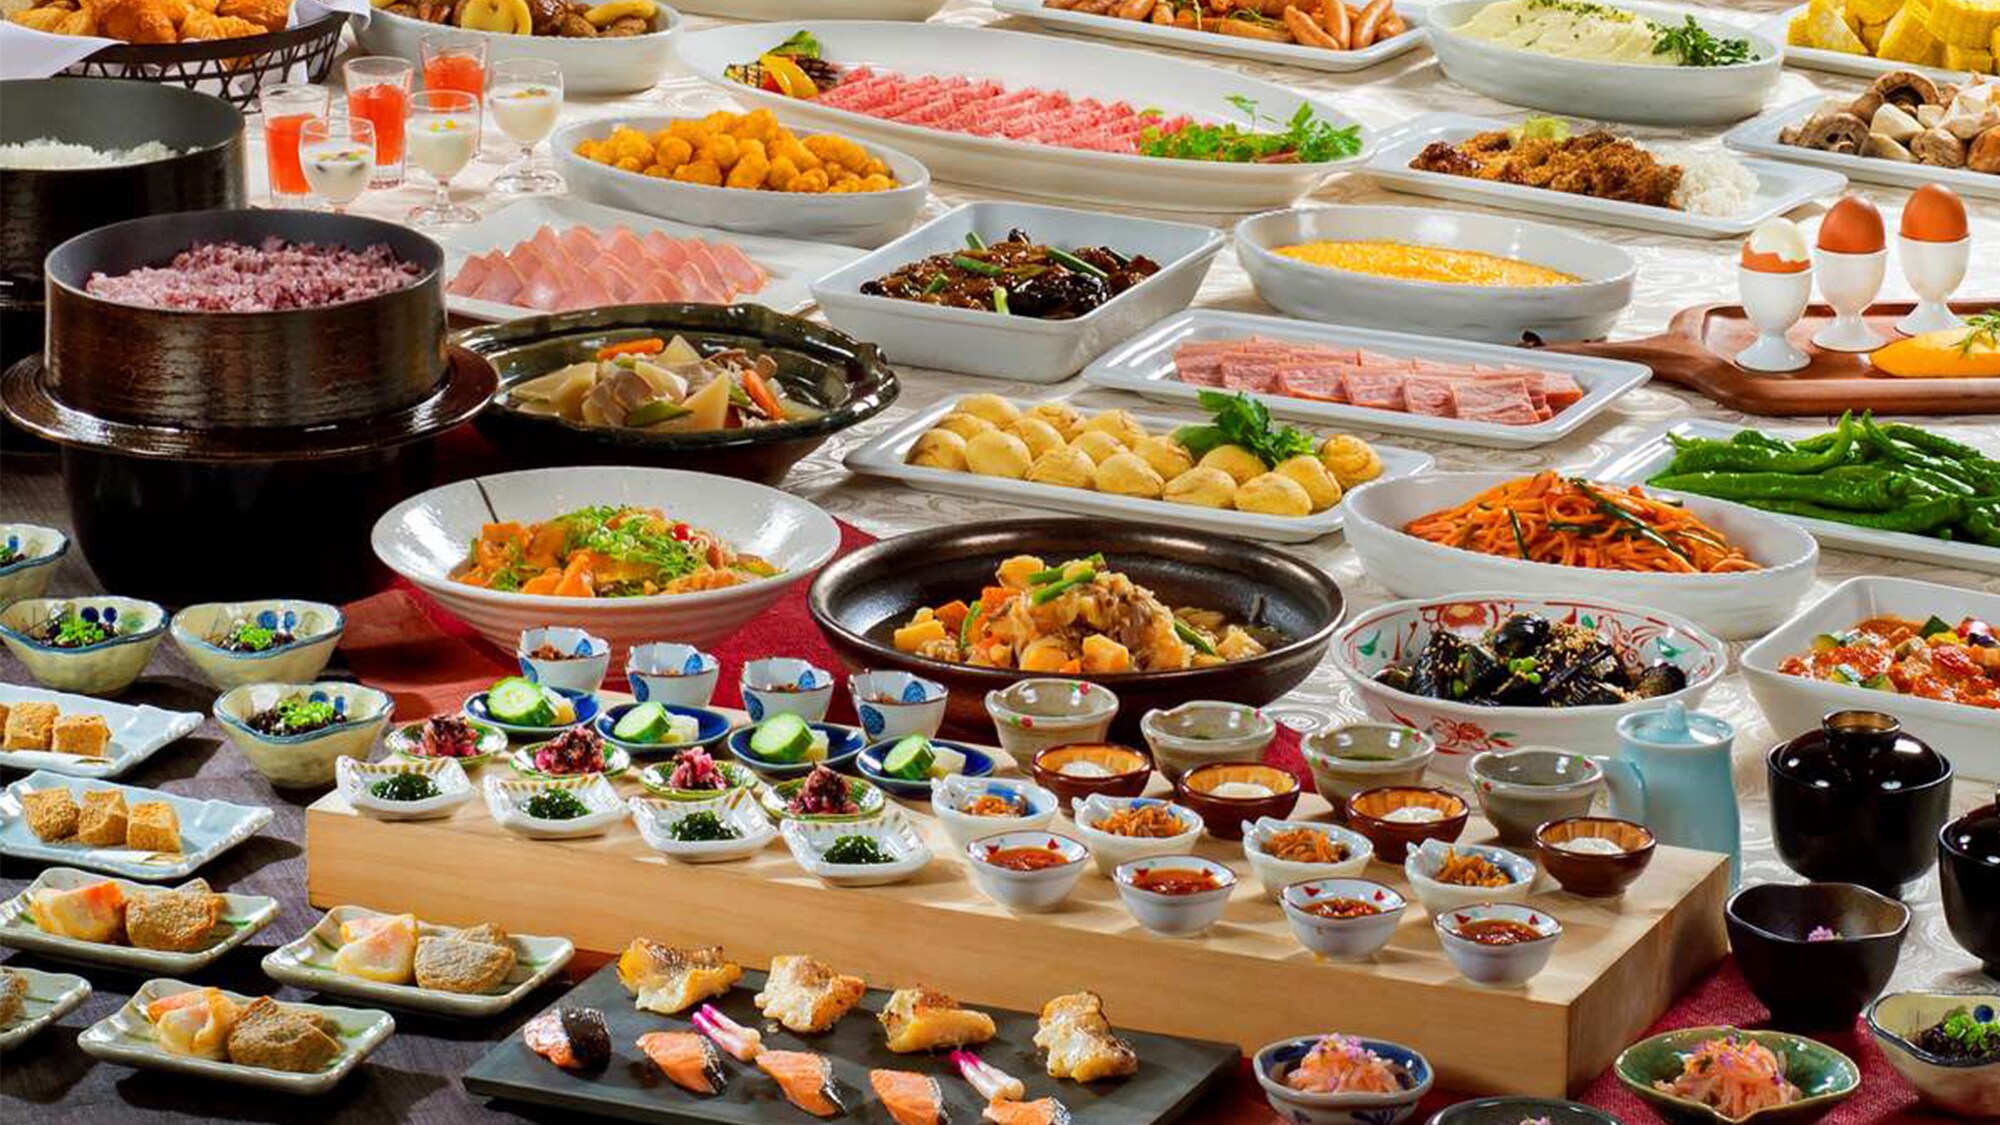 Breakfast buffet (example) "Approximately 40 types of Japanese and Western breakfast buffets" that are particular about quality and quantity